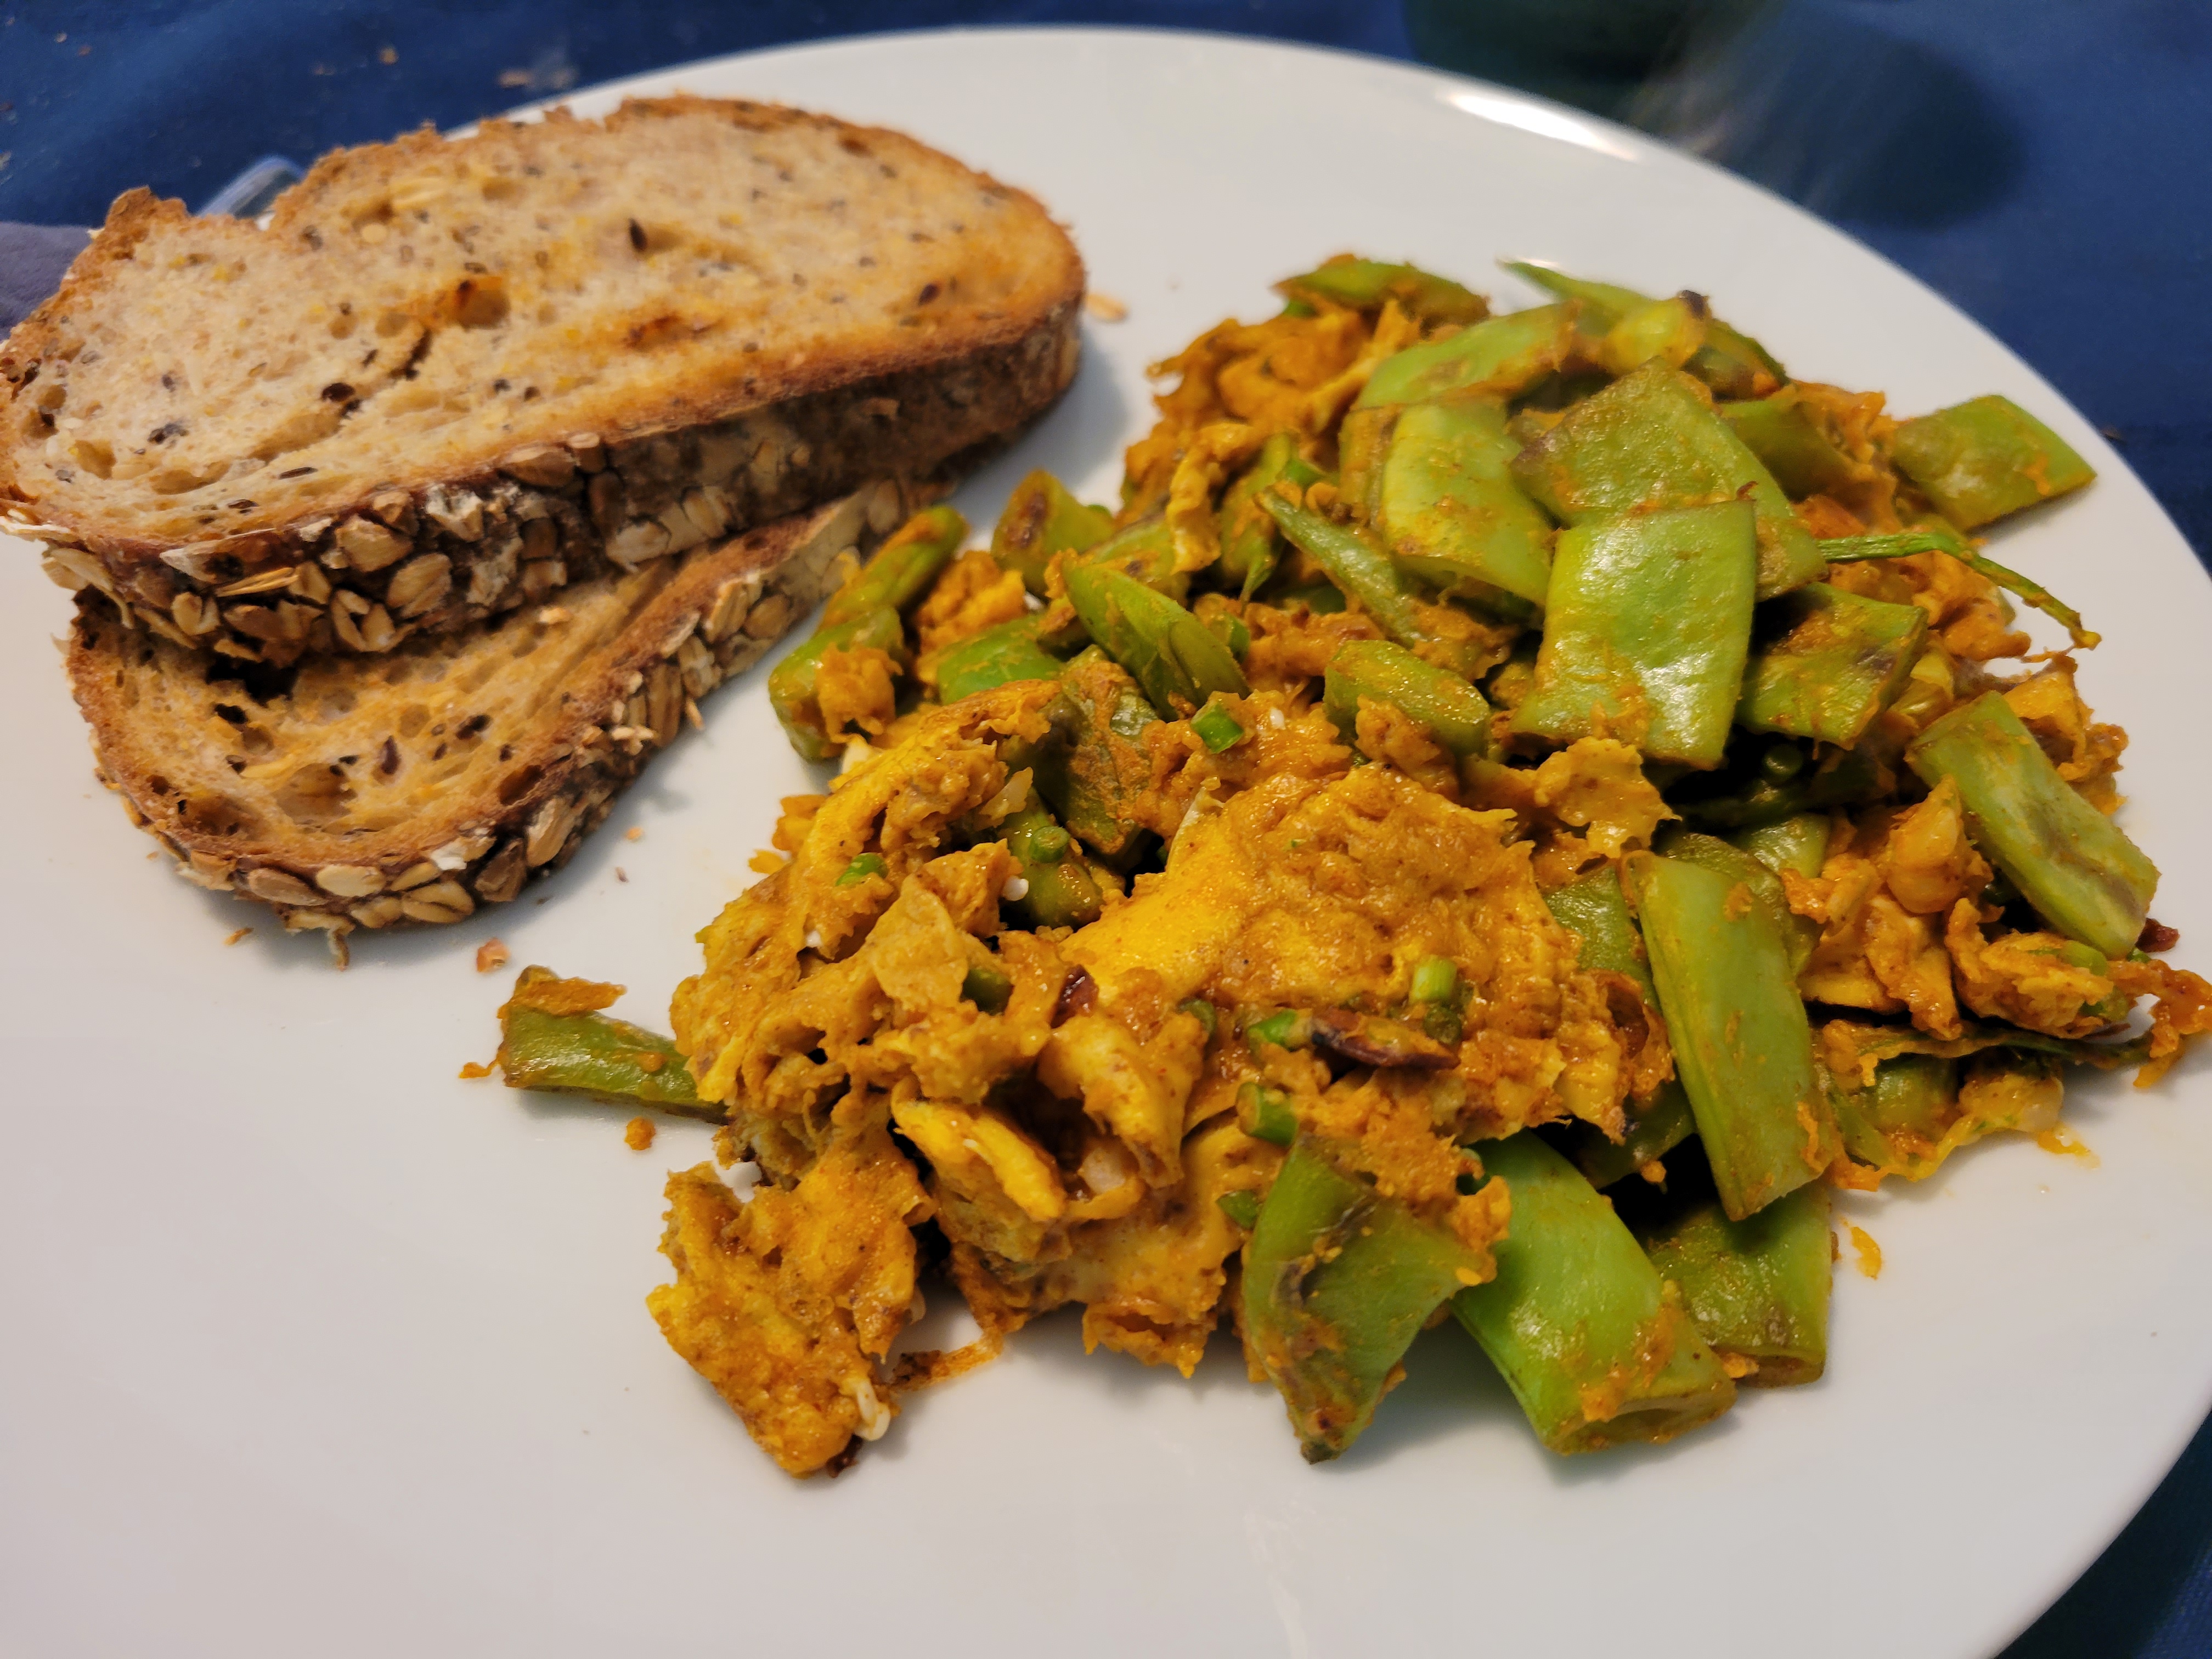 plate of scrambled eggs with romano beans, accompanied by toast